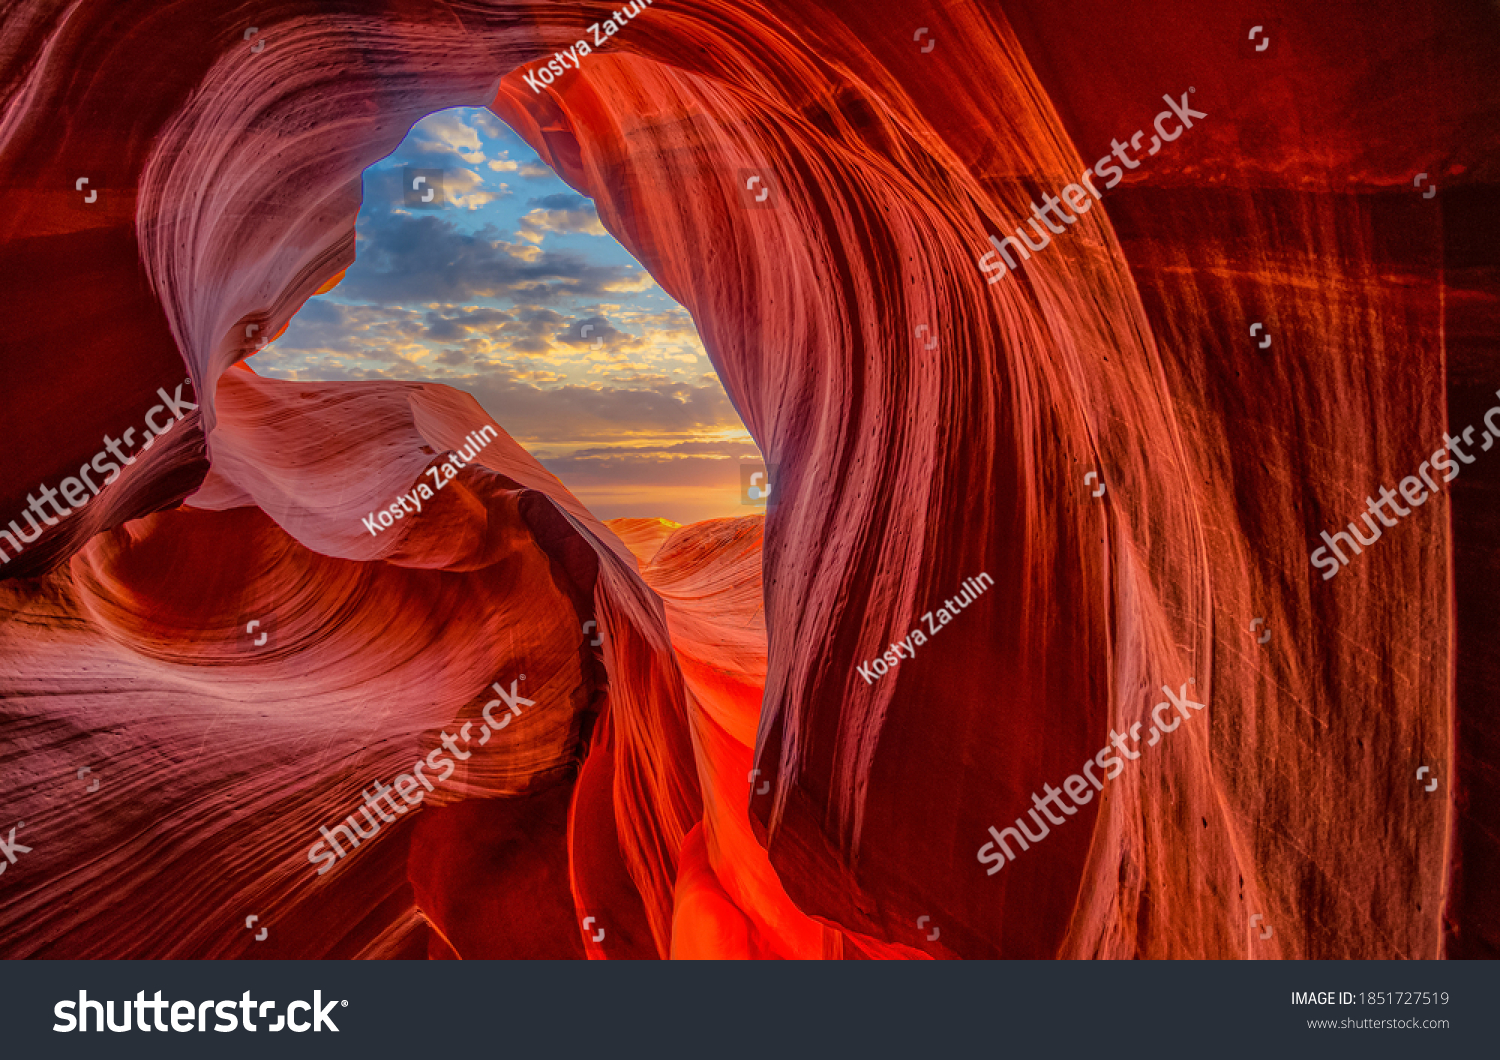 Cave light in abstract naturally red sandstone rock mountains #1851727519